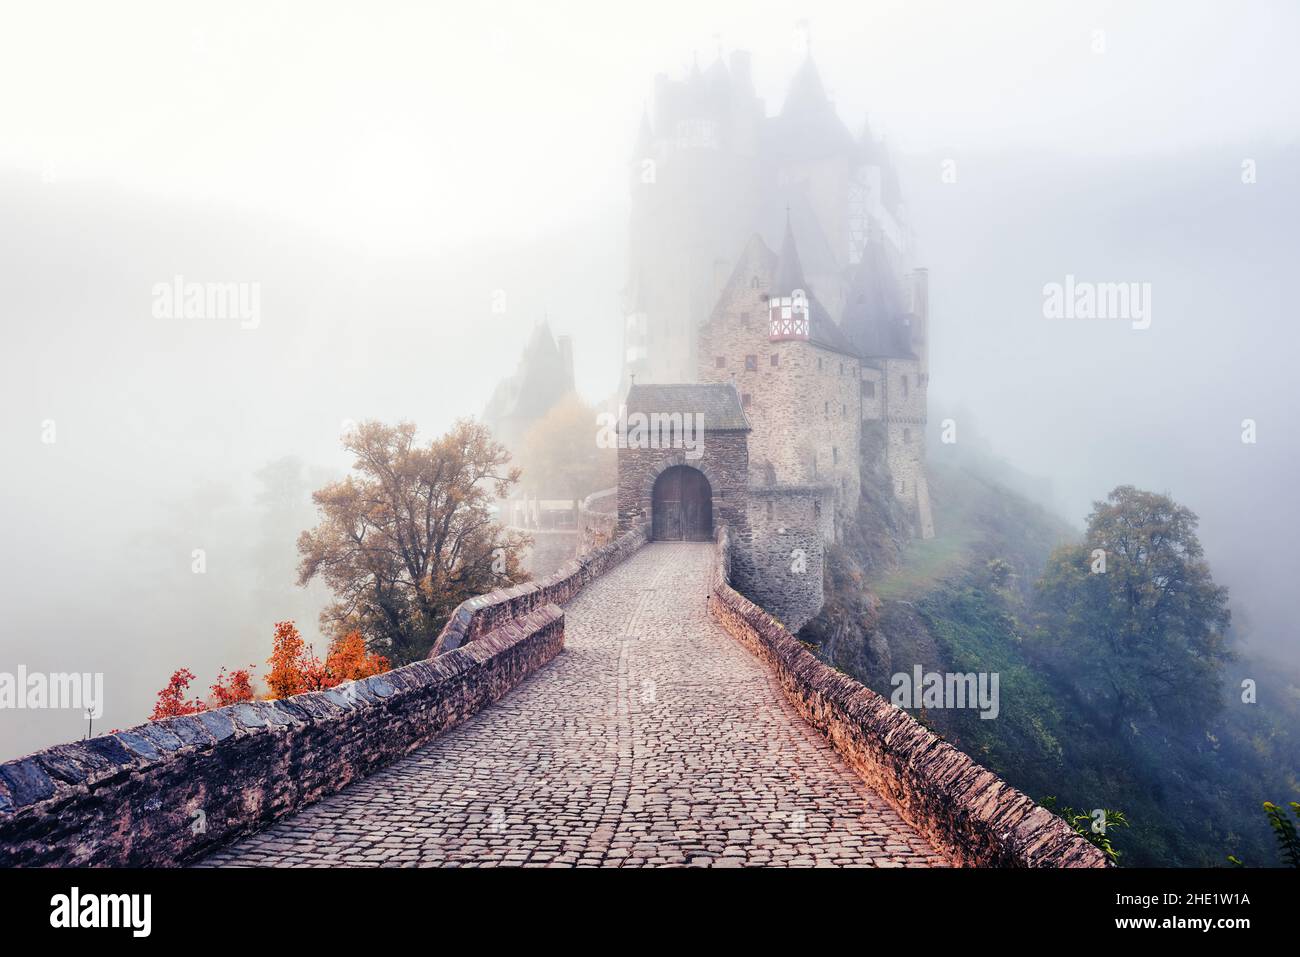 Historical Burg Eltz castle, Moselle river valley, Germany, in a cloud of mist on a cold autumn day Stock Photo